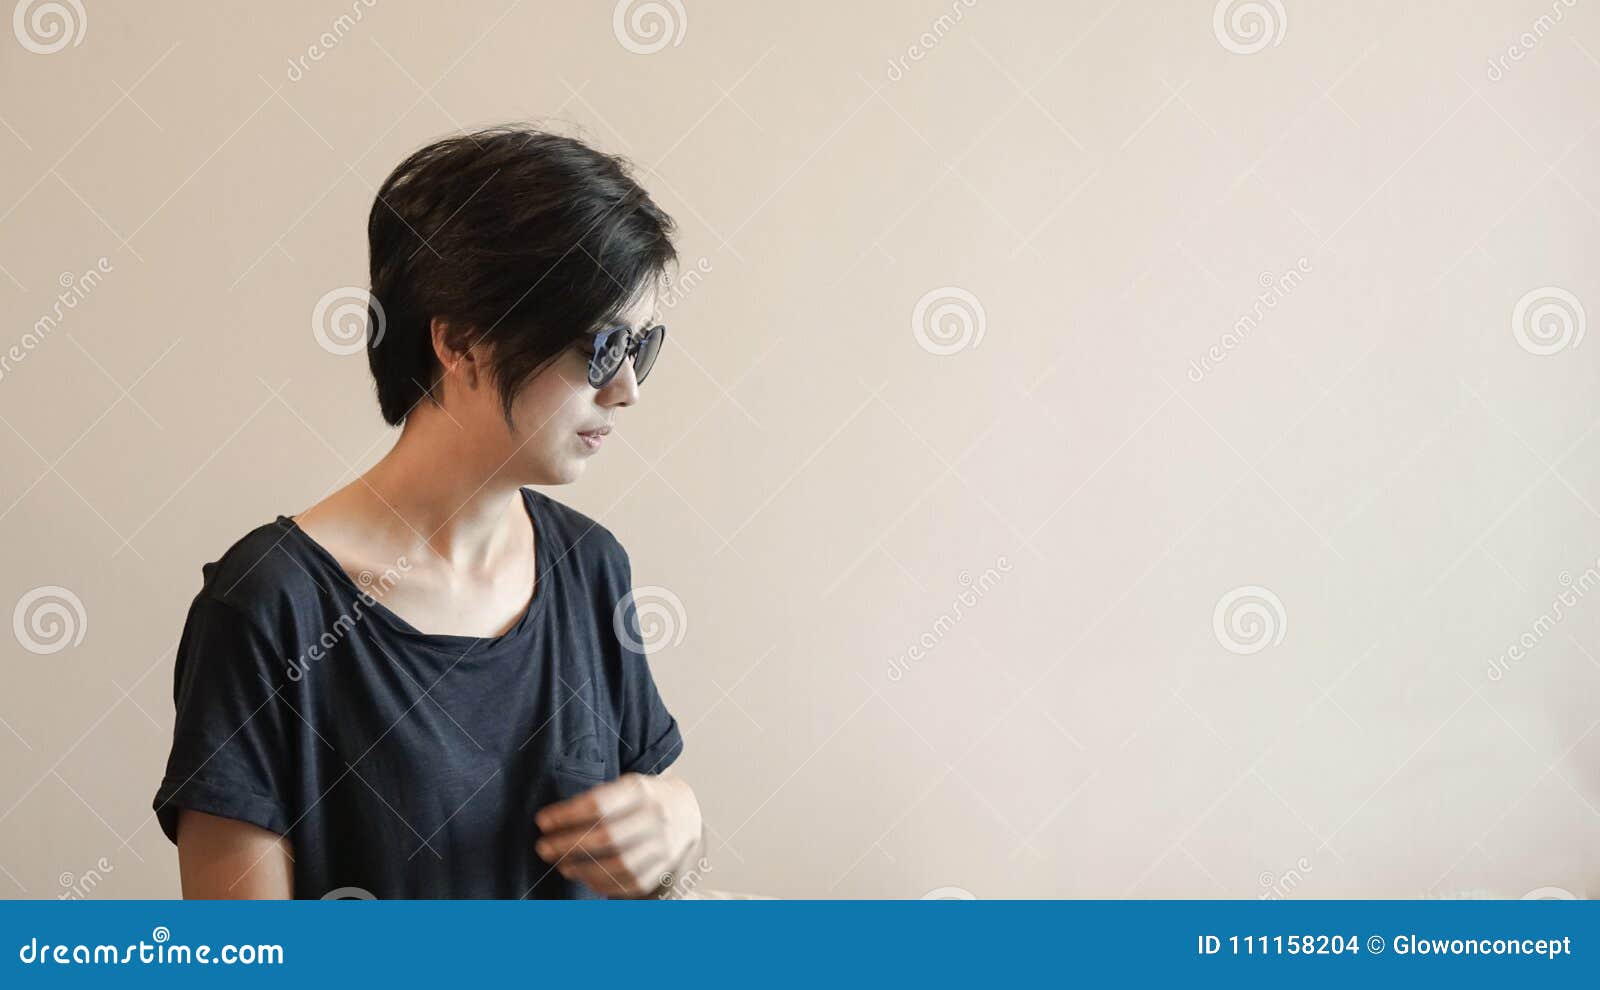 Cool Asian Woman Short Hair with Sunglasses in Modern Expression Stock  Photo - Image of sunglass, beautiful: 111158204